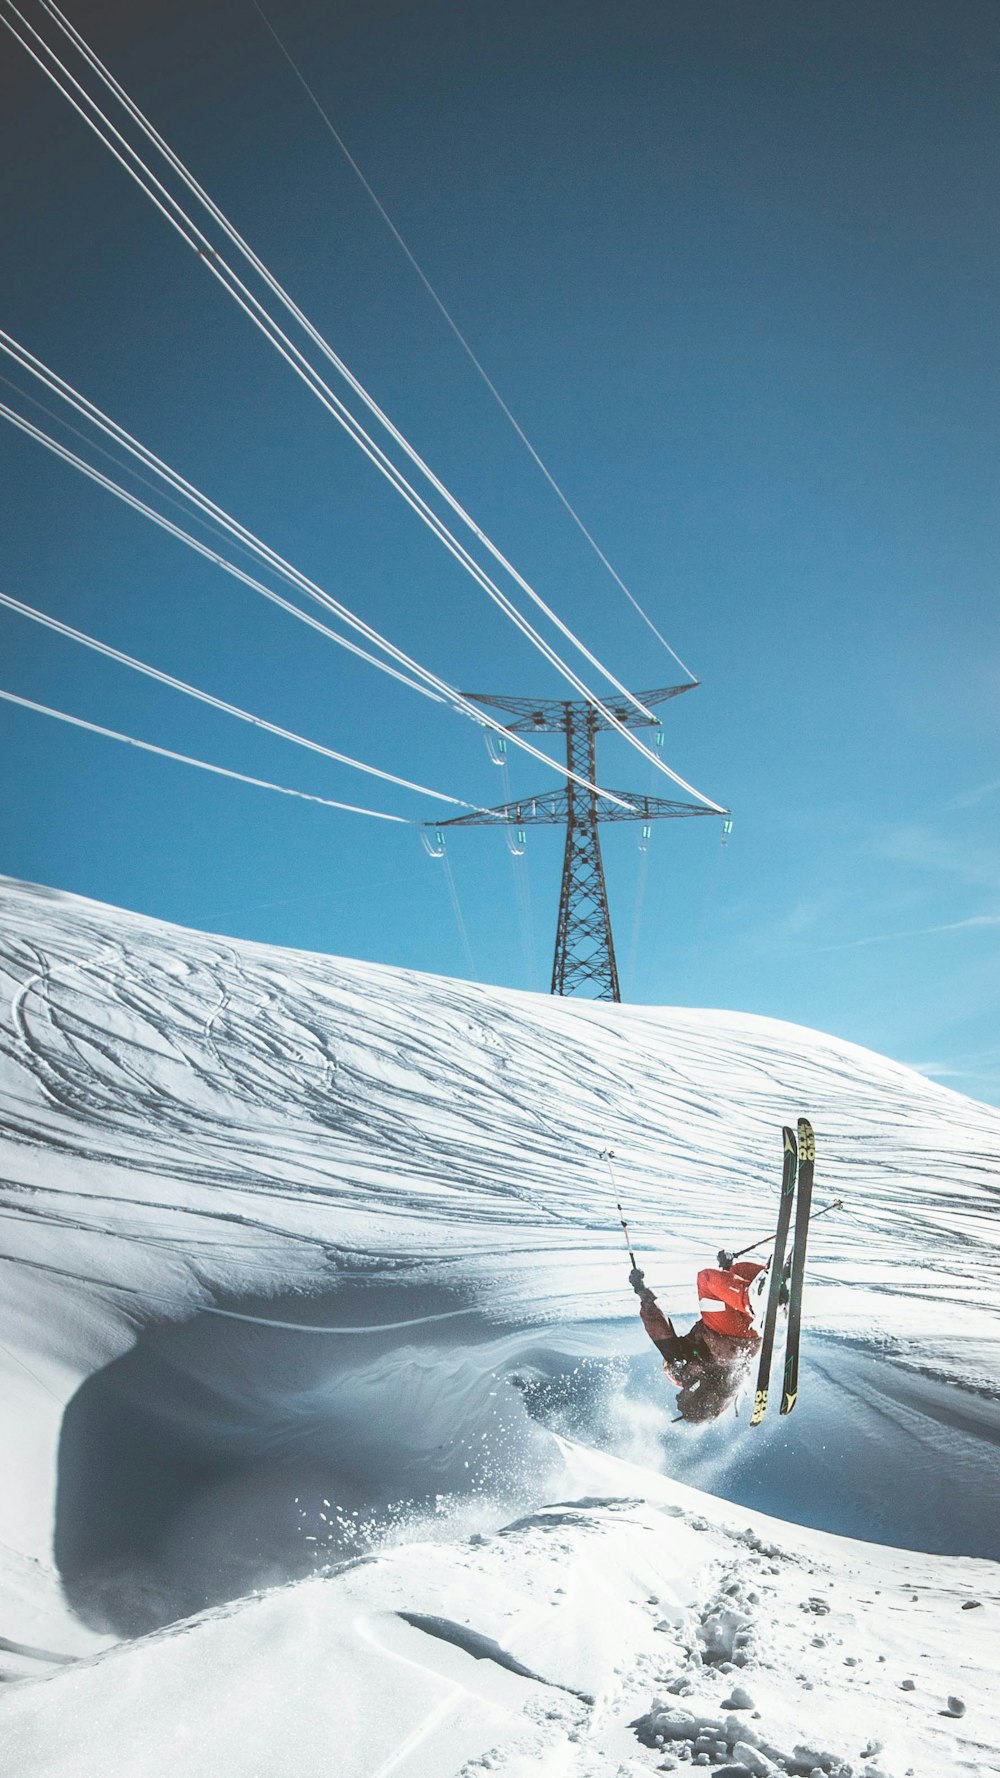 man skiing on snow near electric tower